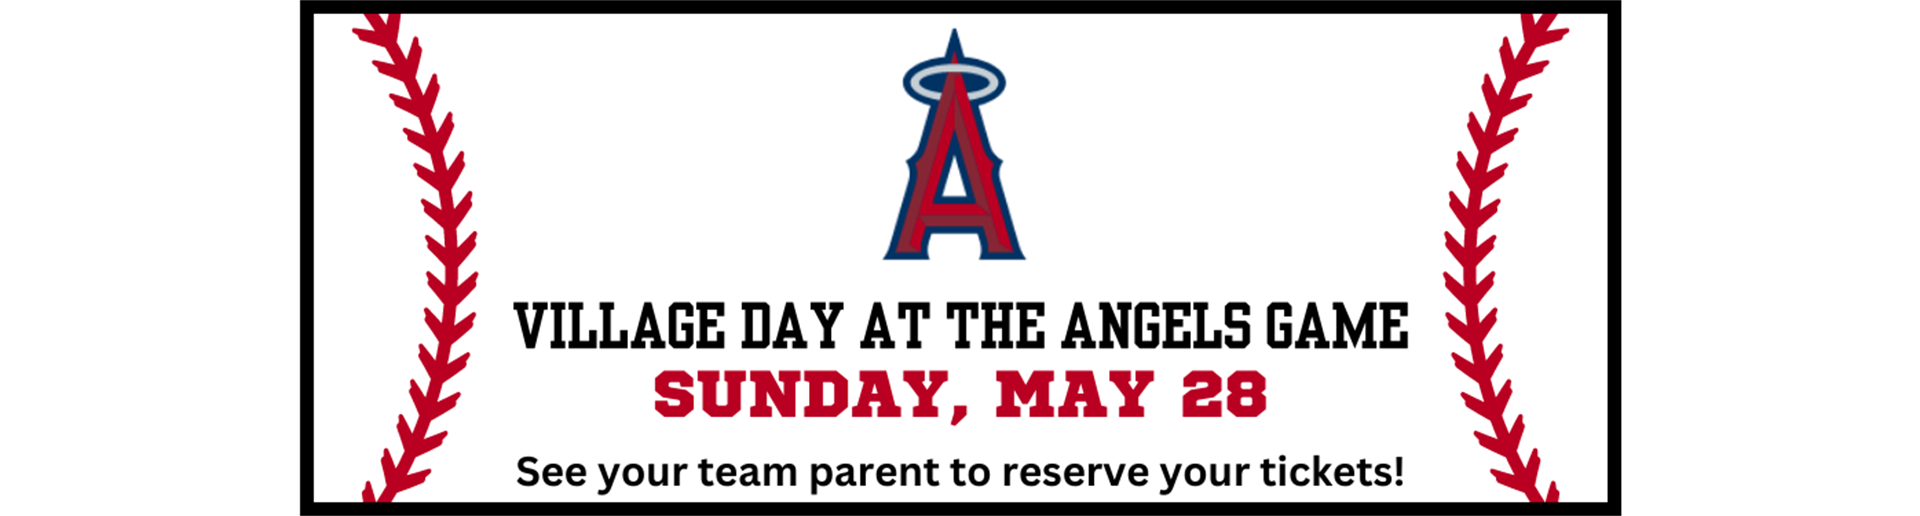 Village Day at the Angels Game